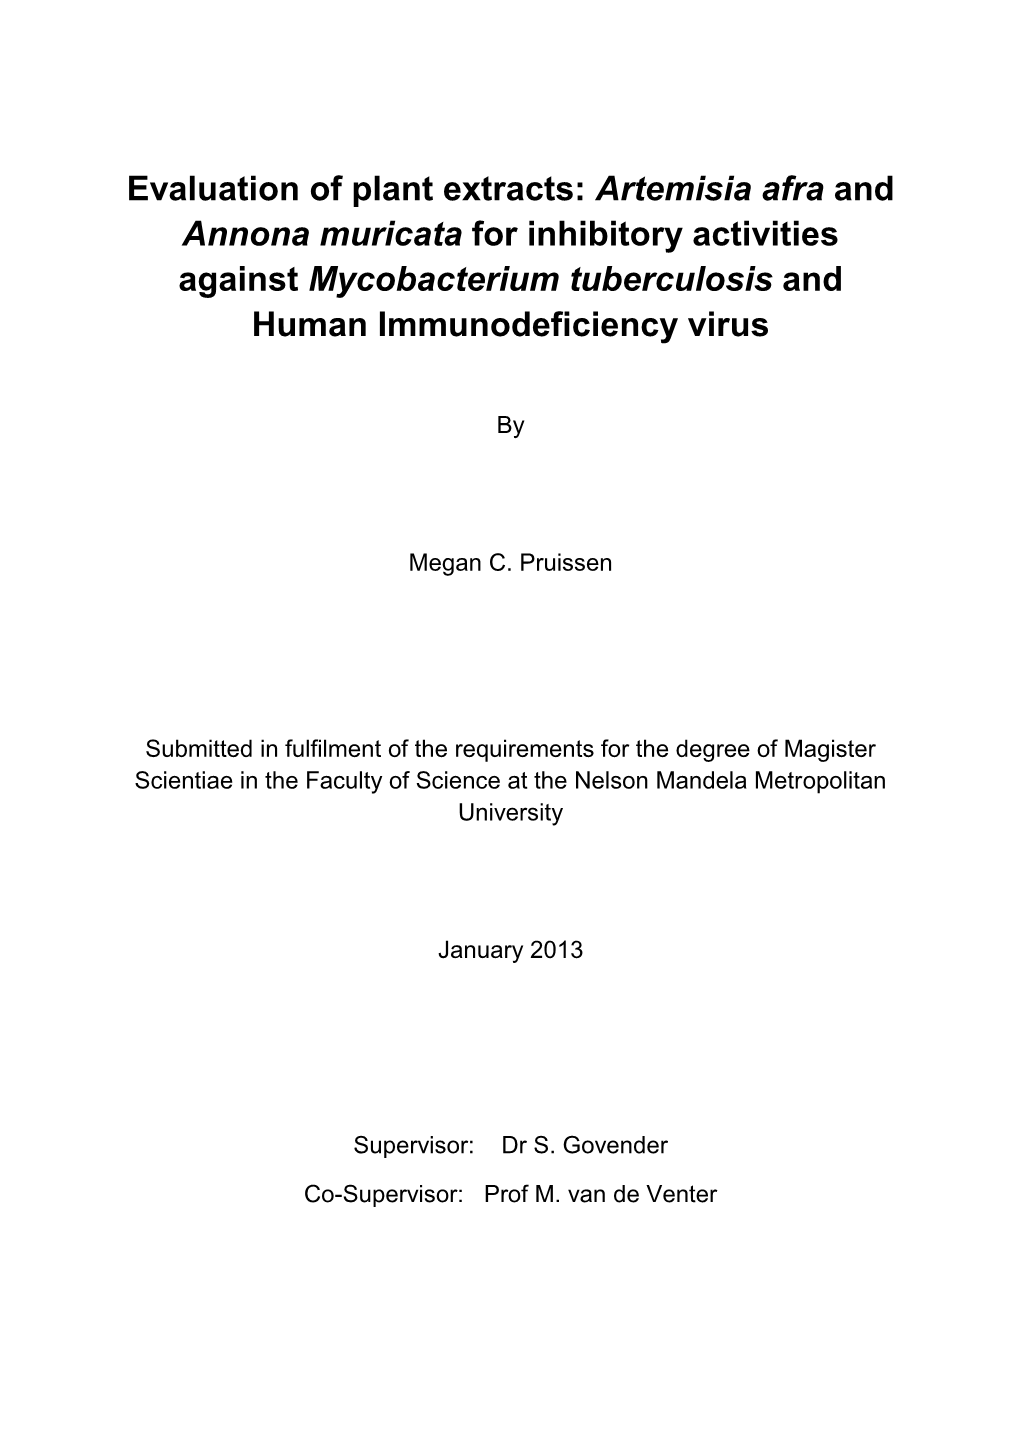 Evaluation of Plant Extracts: Artemisia Afra and Annona Muricata for Inhibitory Activities Against Mycobacterium Tuberculosis and Human Immunodeficiency Virus